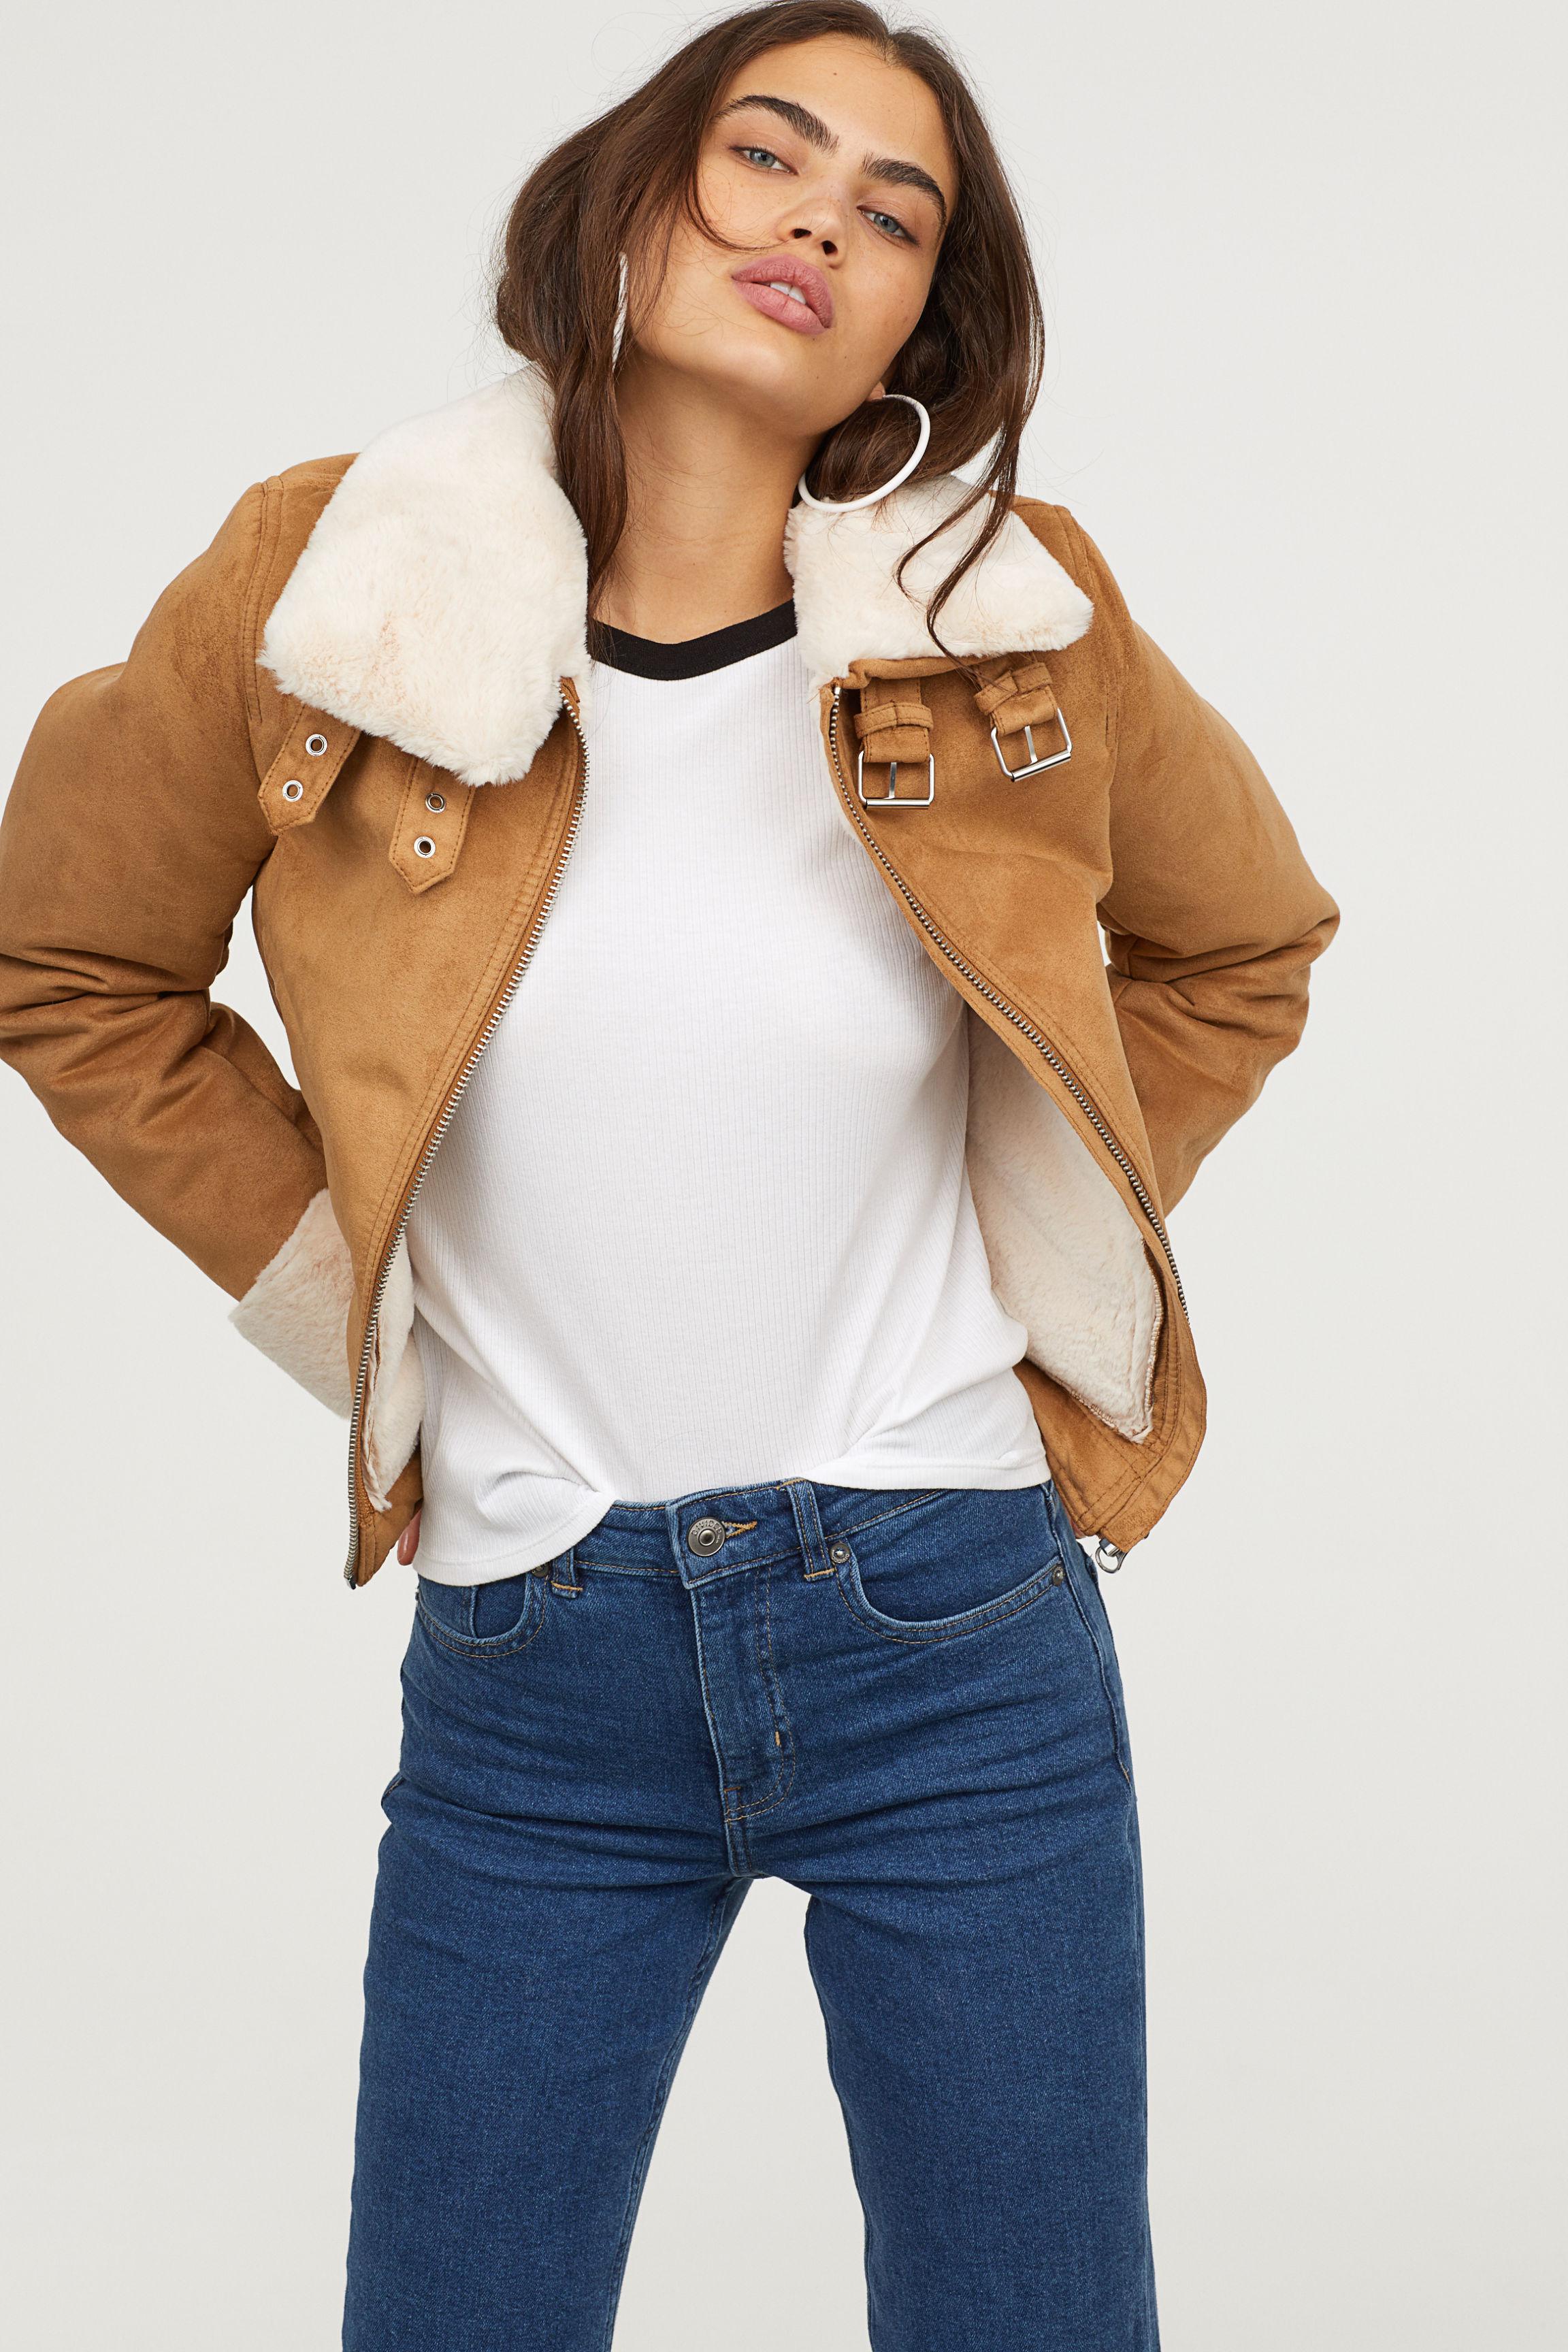 H&M Jacket With Faux Fur Lining in Natural | Lyst